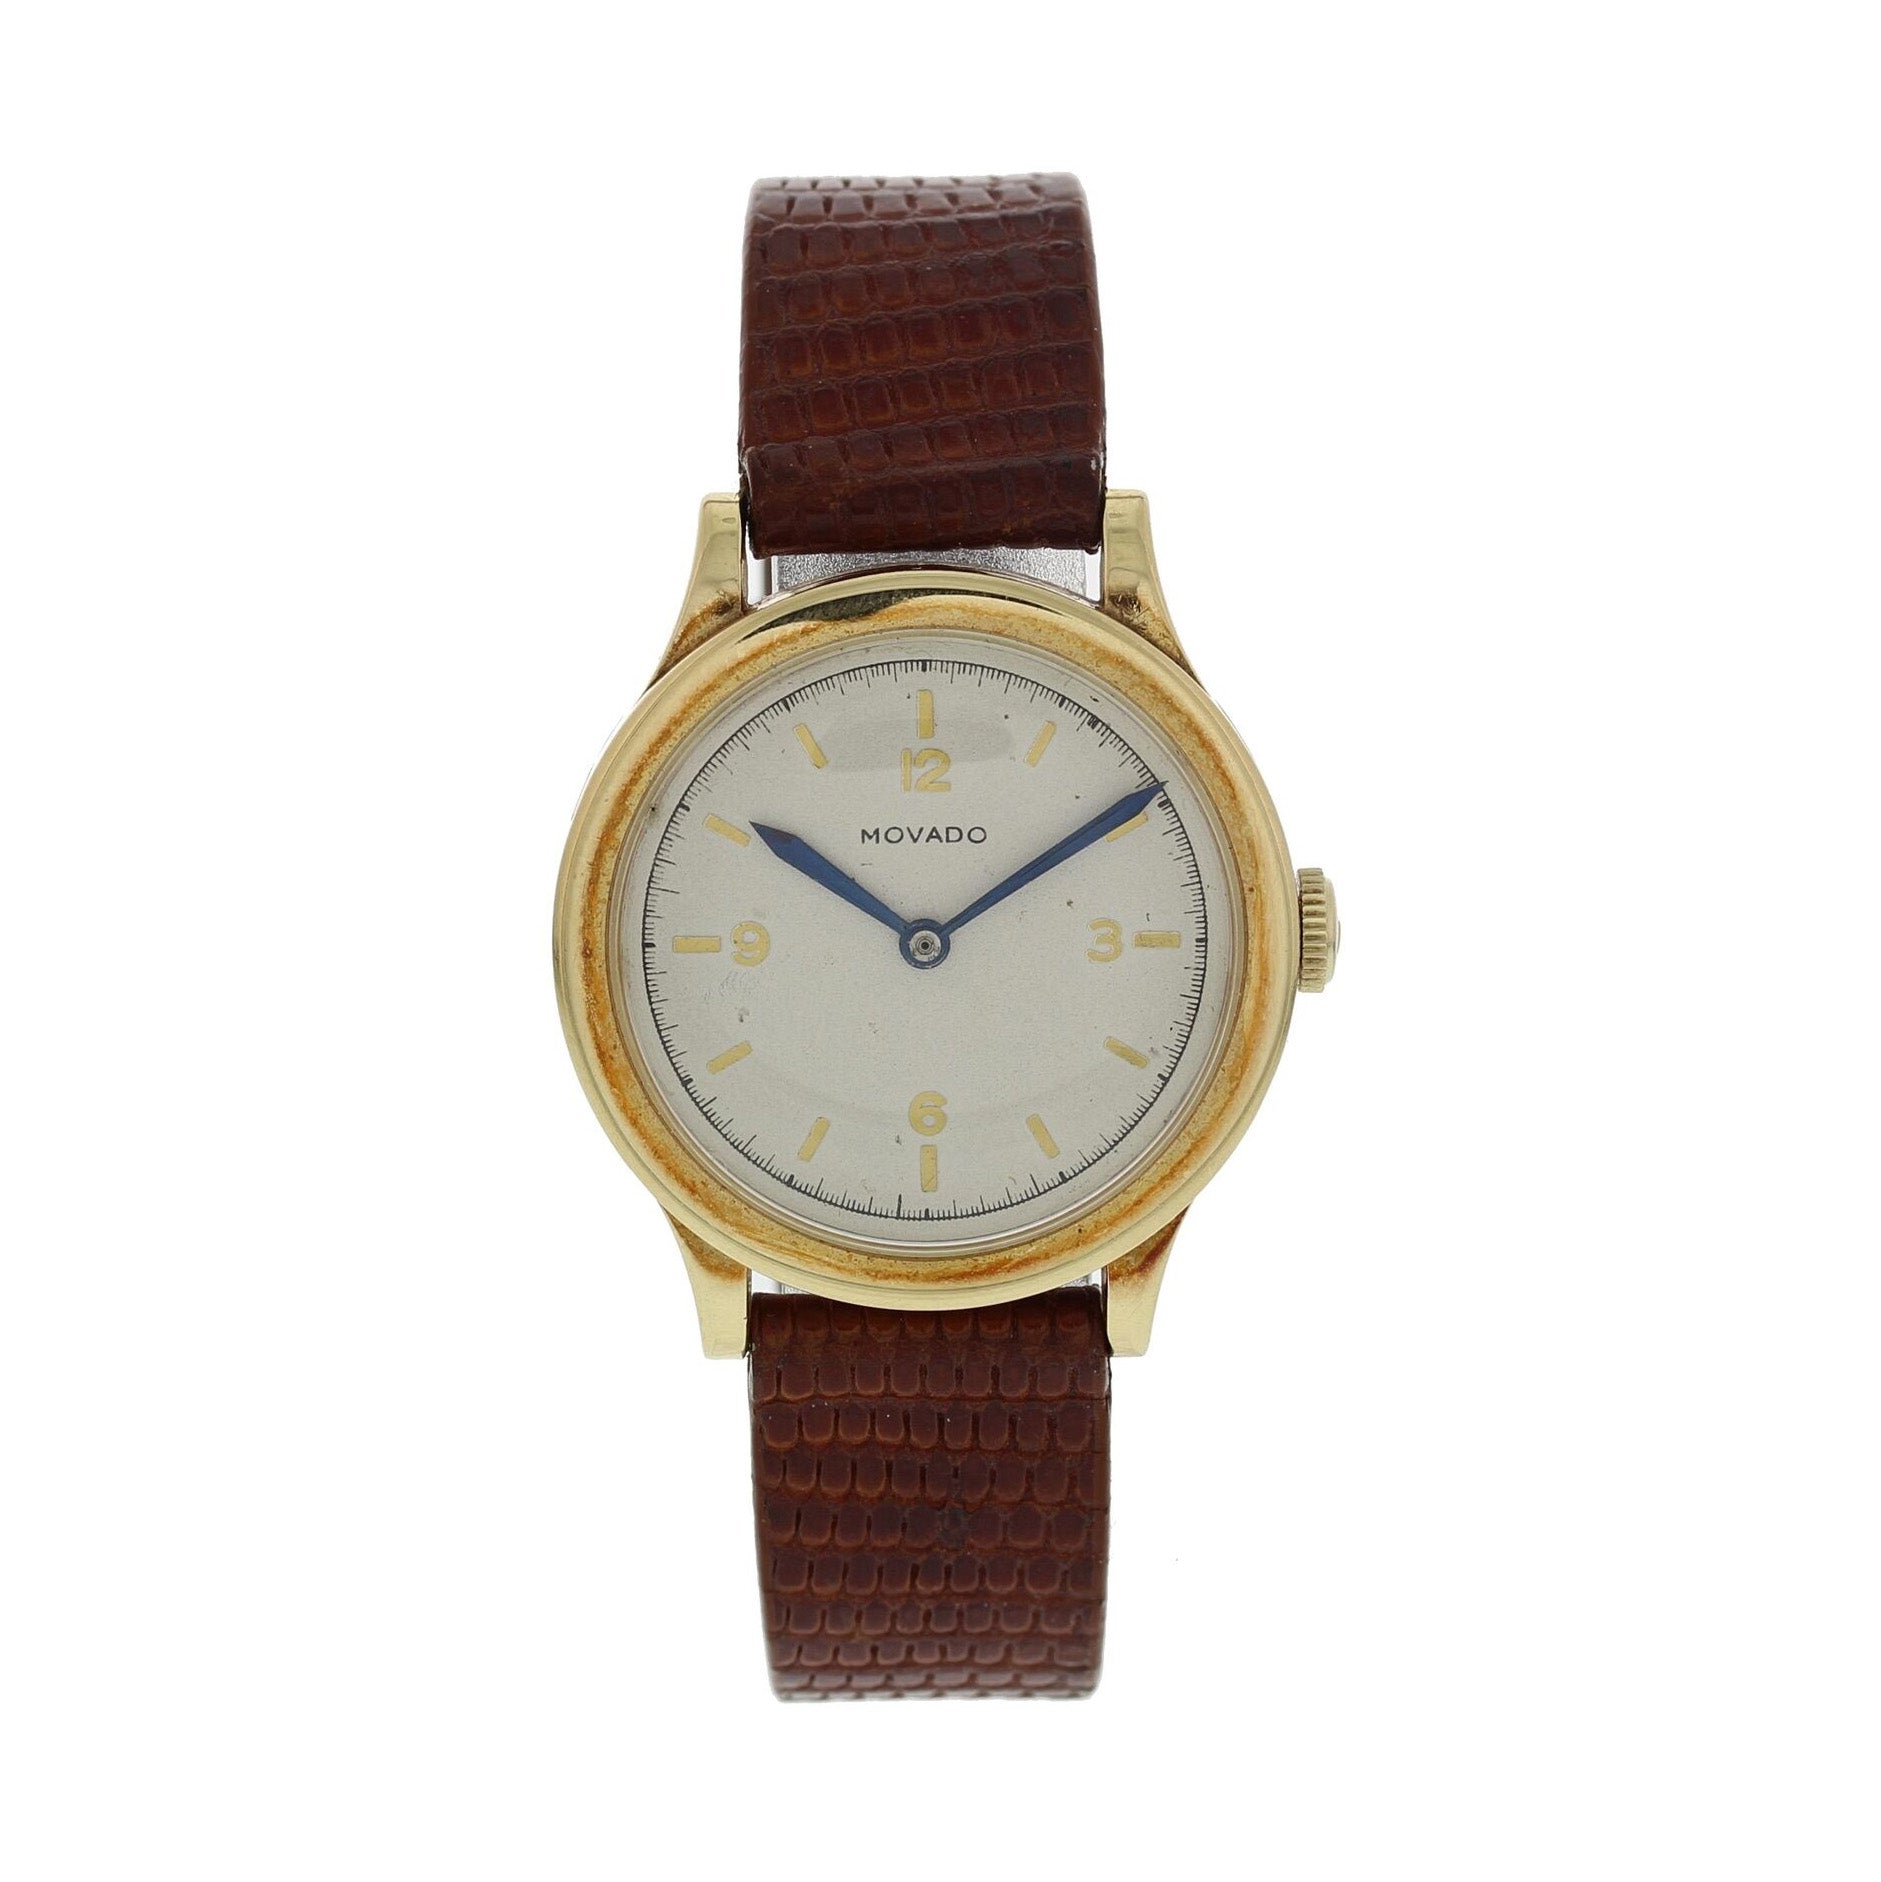 Vintage 1960's Movado Gold Toned Mechanical Watch